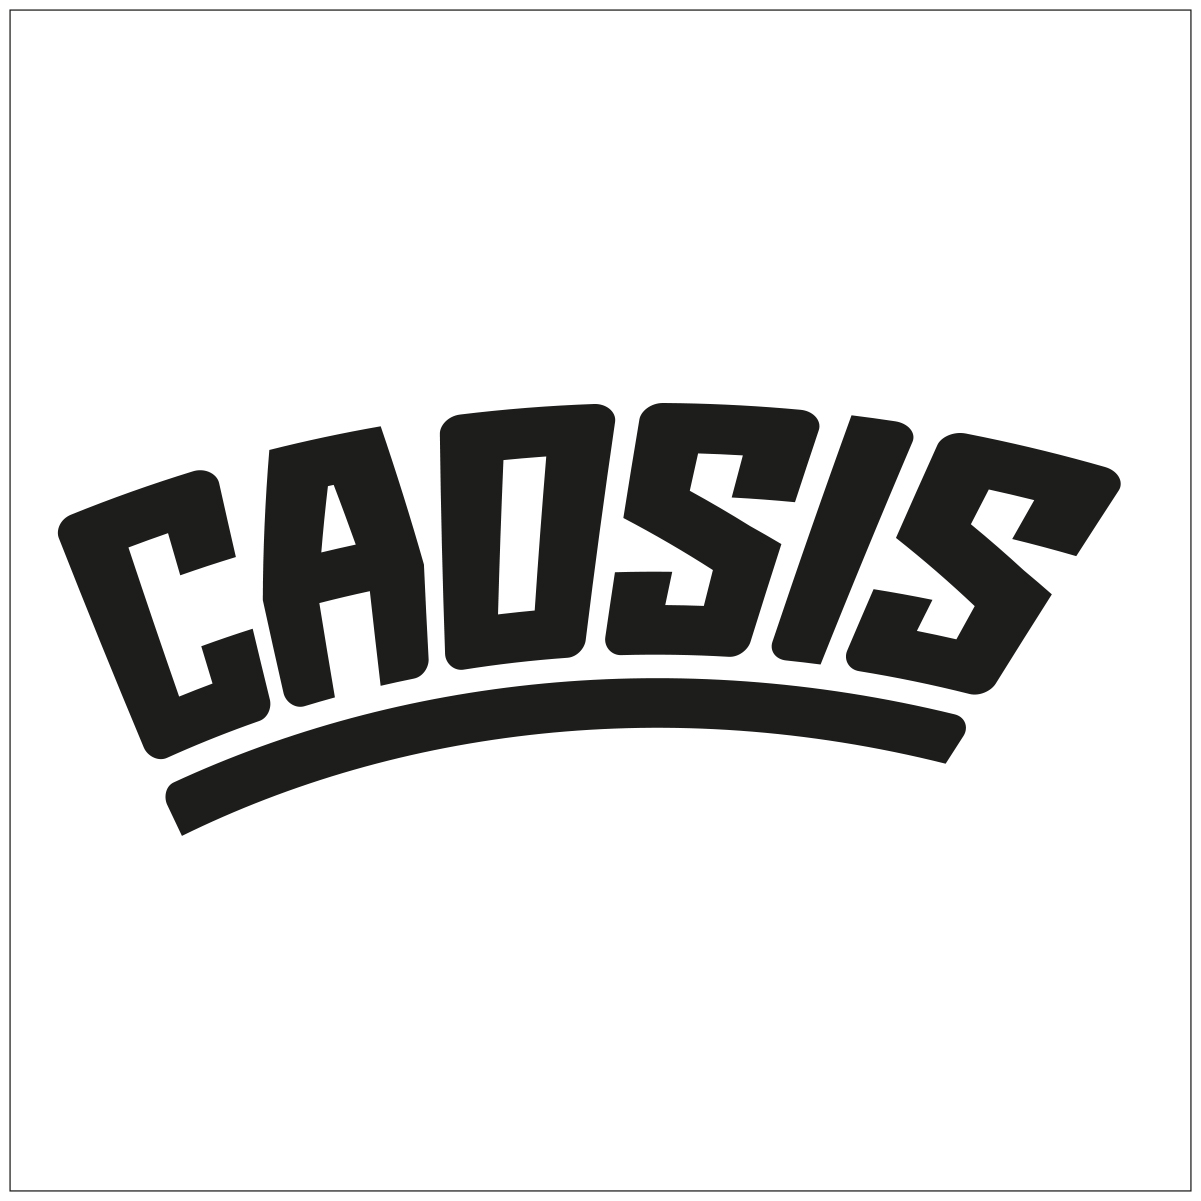 Caosis